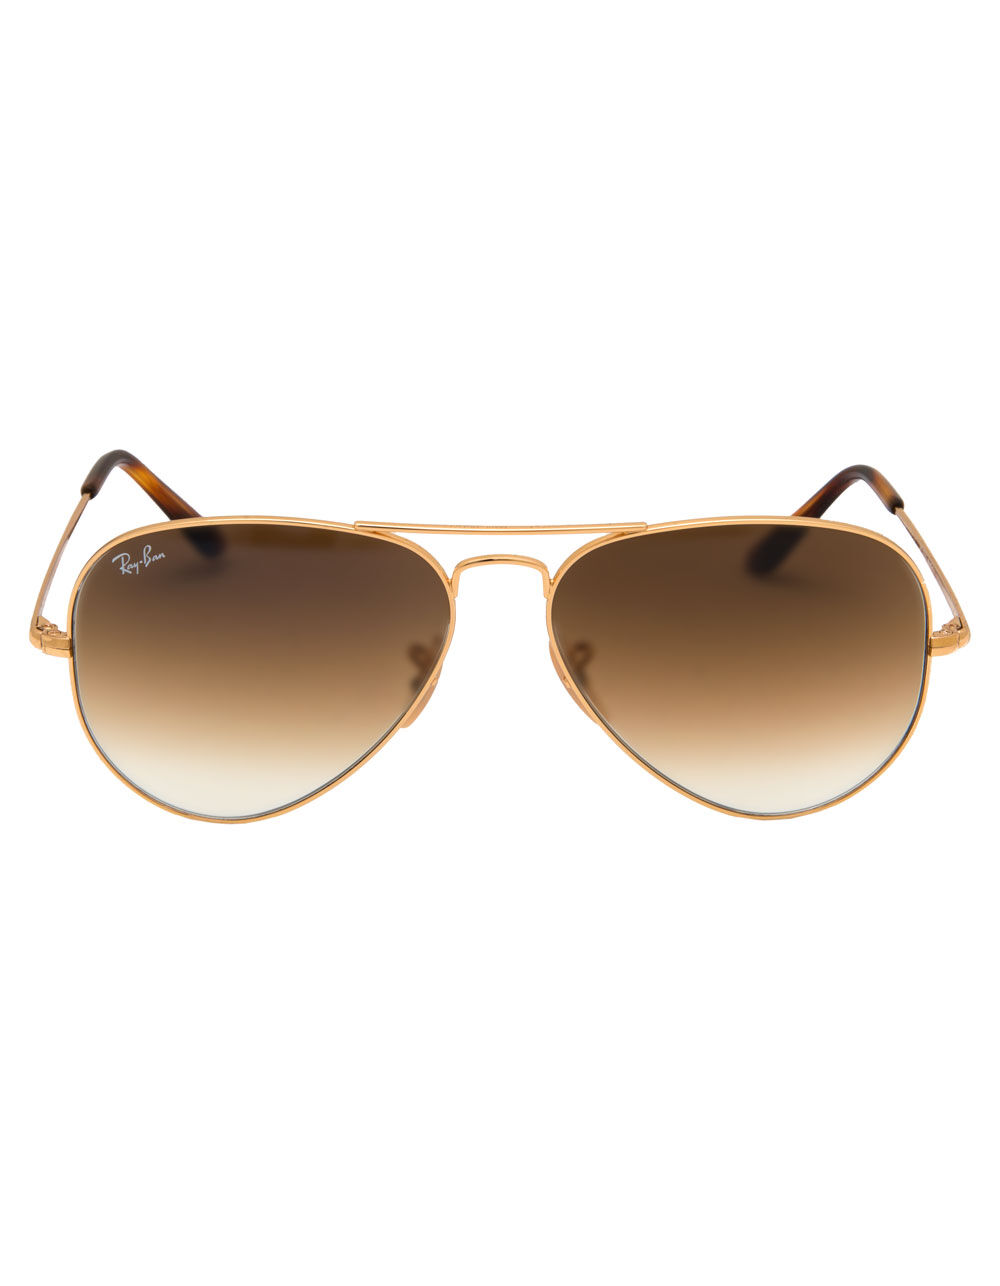 RAY-BAN RB3689 Aviator Gold & Light Brown Gradient Sunglasses - GOLD/LIGHT  BROWN GRADIENT | Tillys